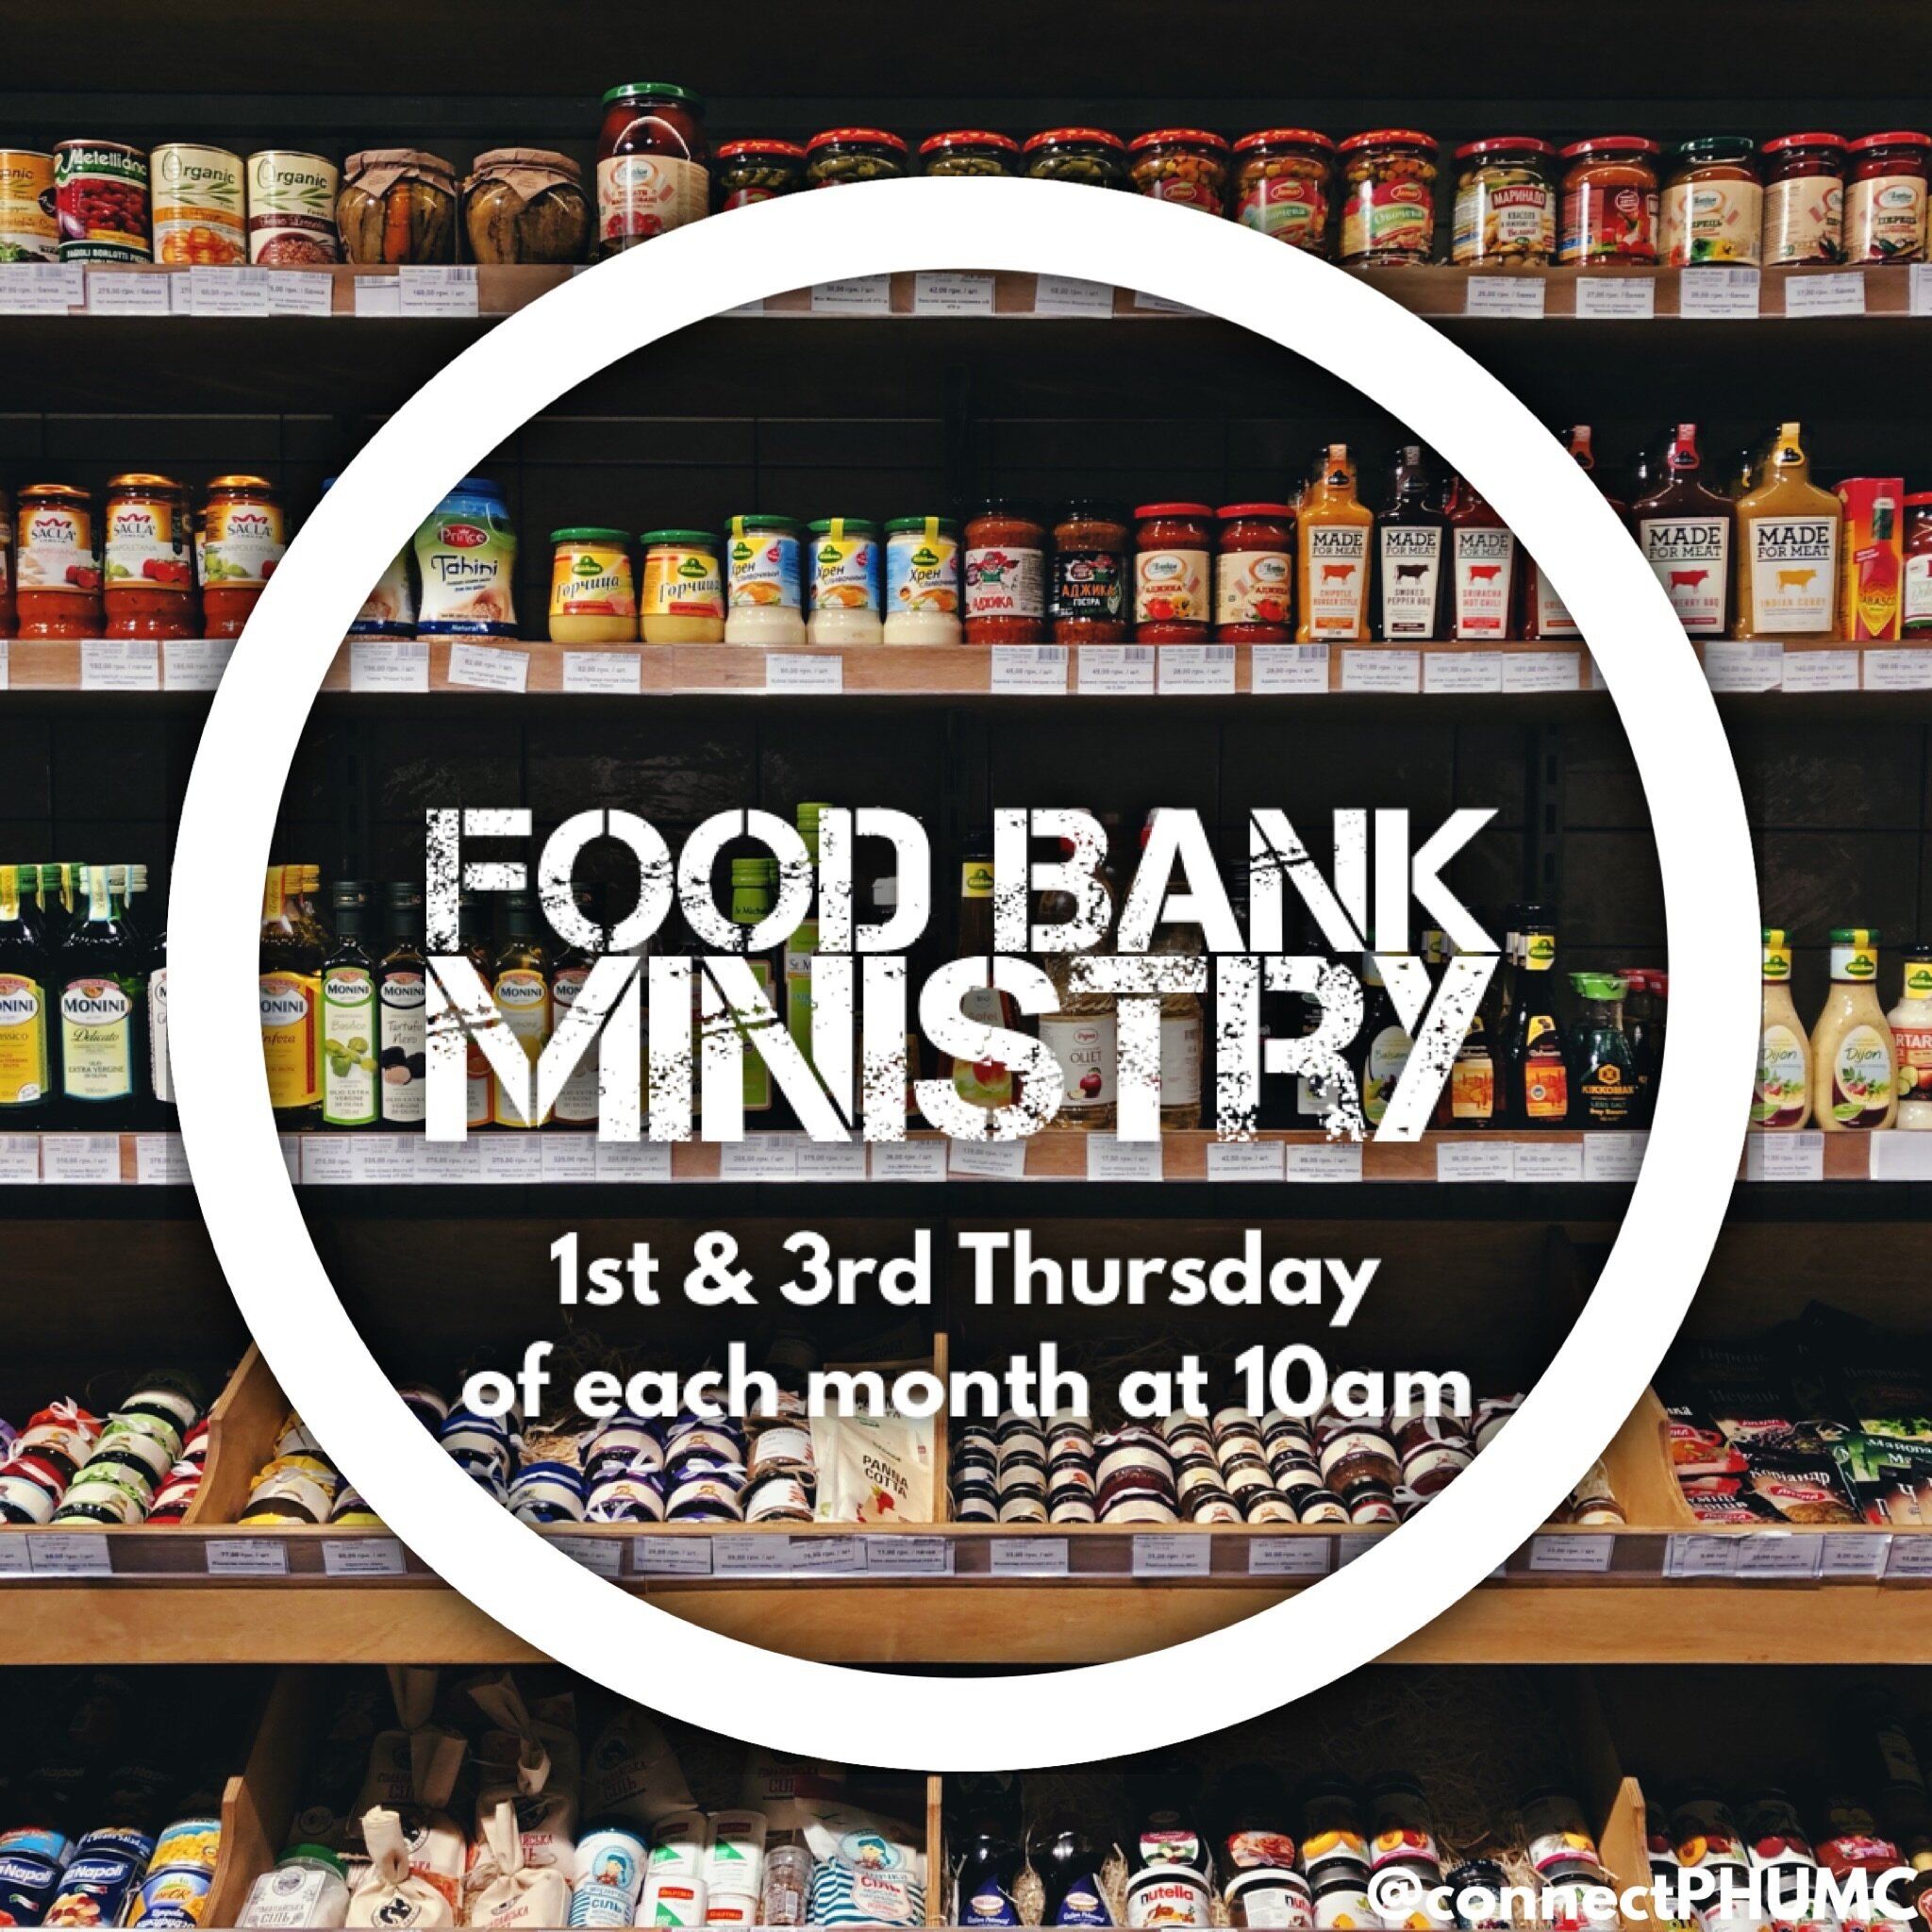 We have a food bank ministry to serve and assist those struggling financially to support themselves or their family. Our vision is for this to serve the individual as a whole with our intention being relationship. Through this ministry, we hope to ge